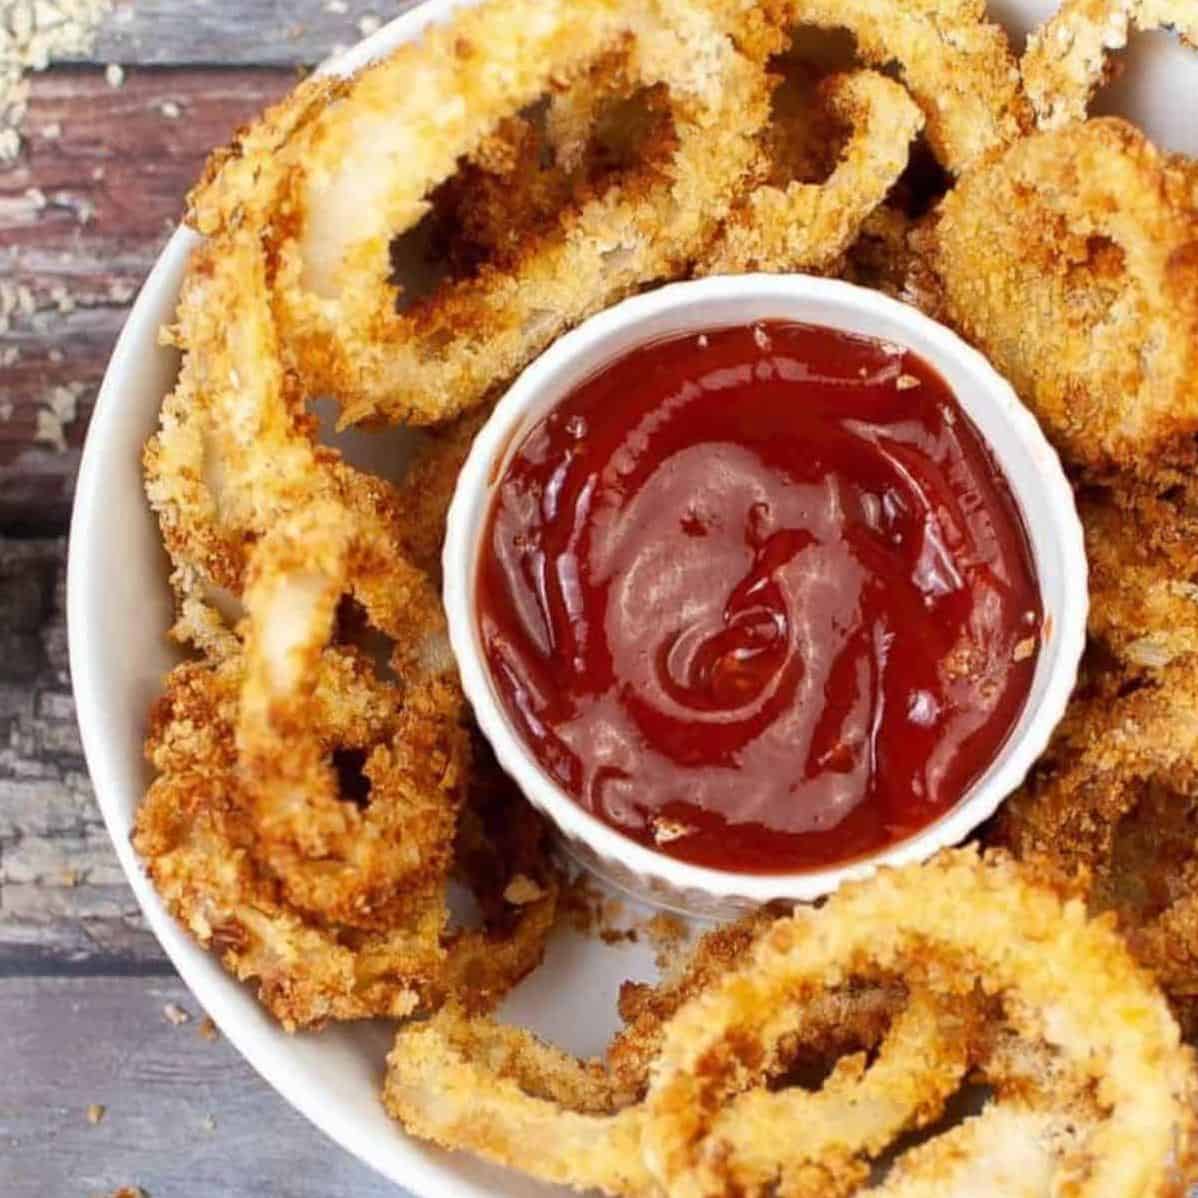  A healthier alternative to traditional onion rings